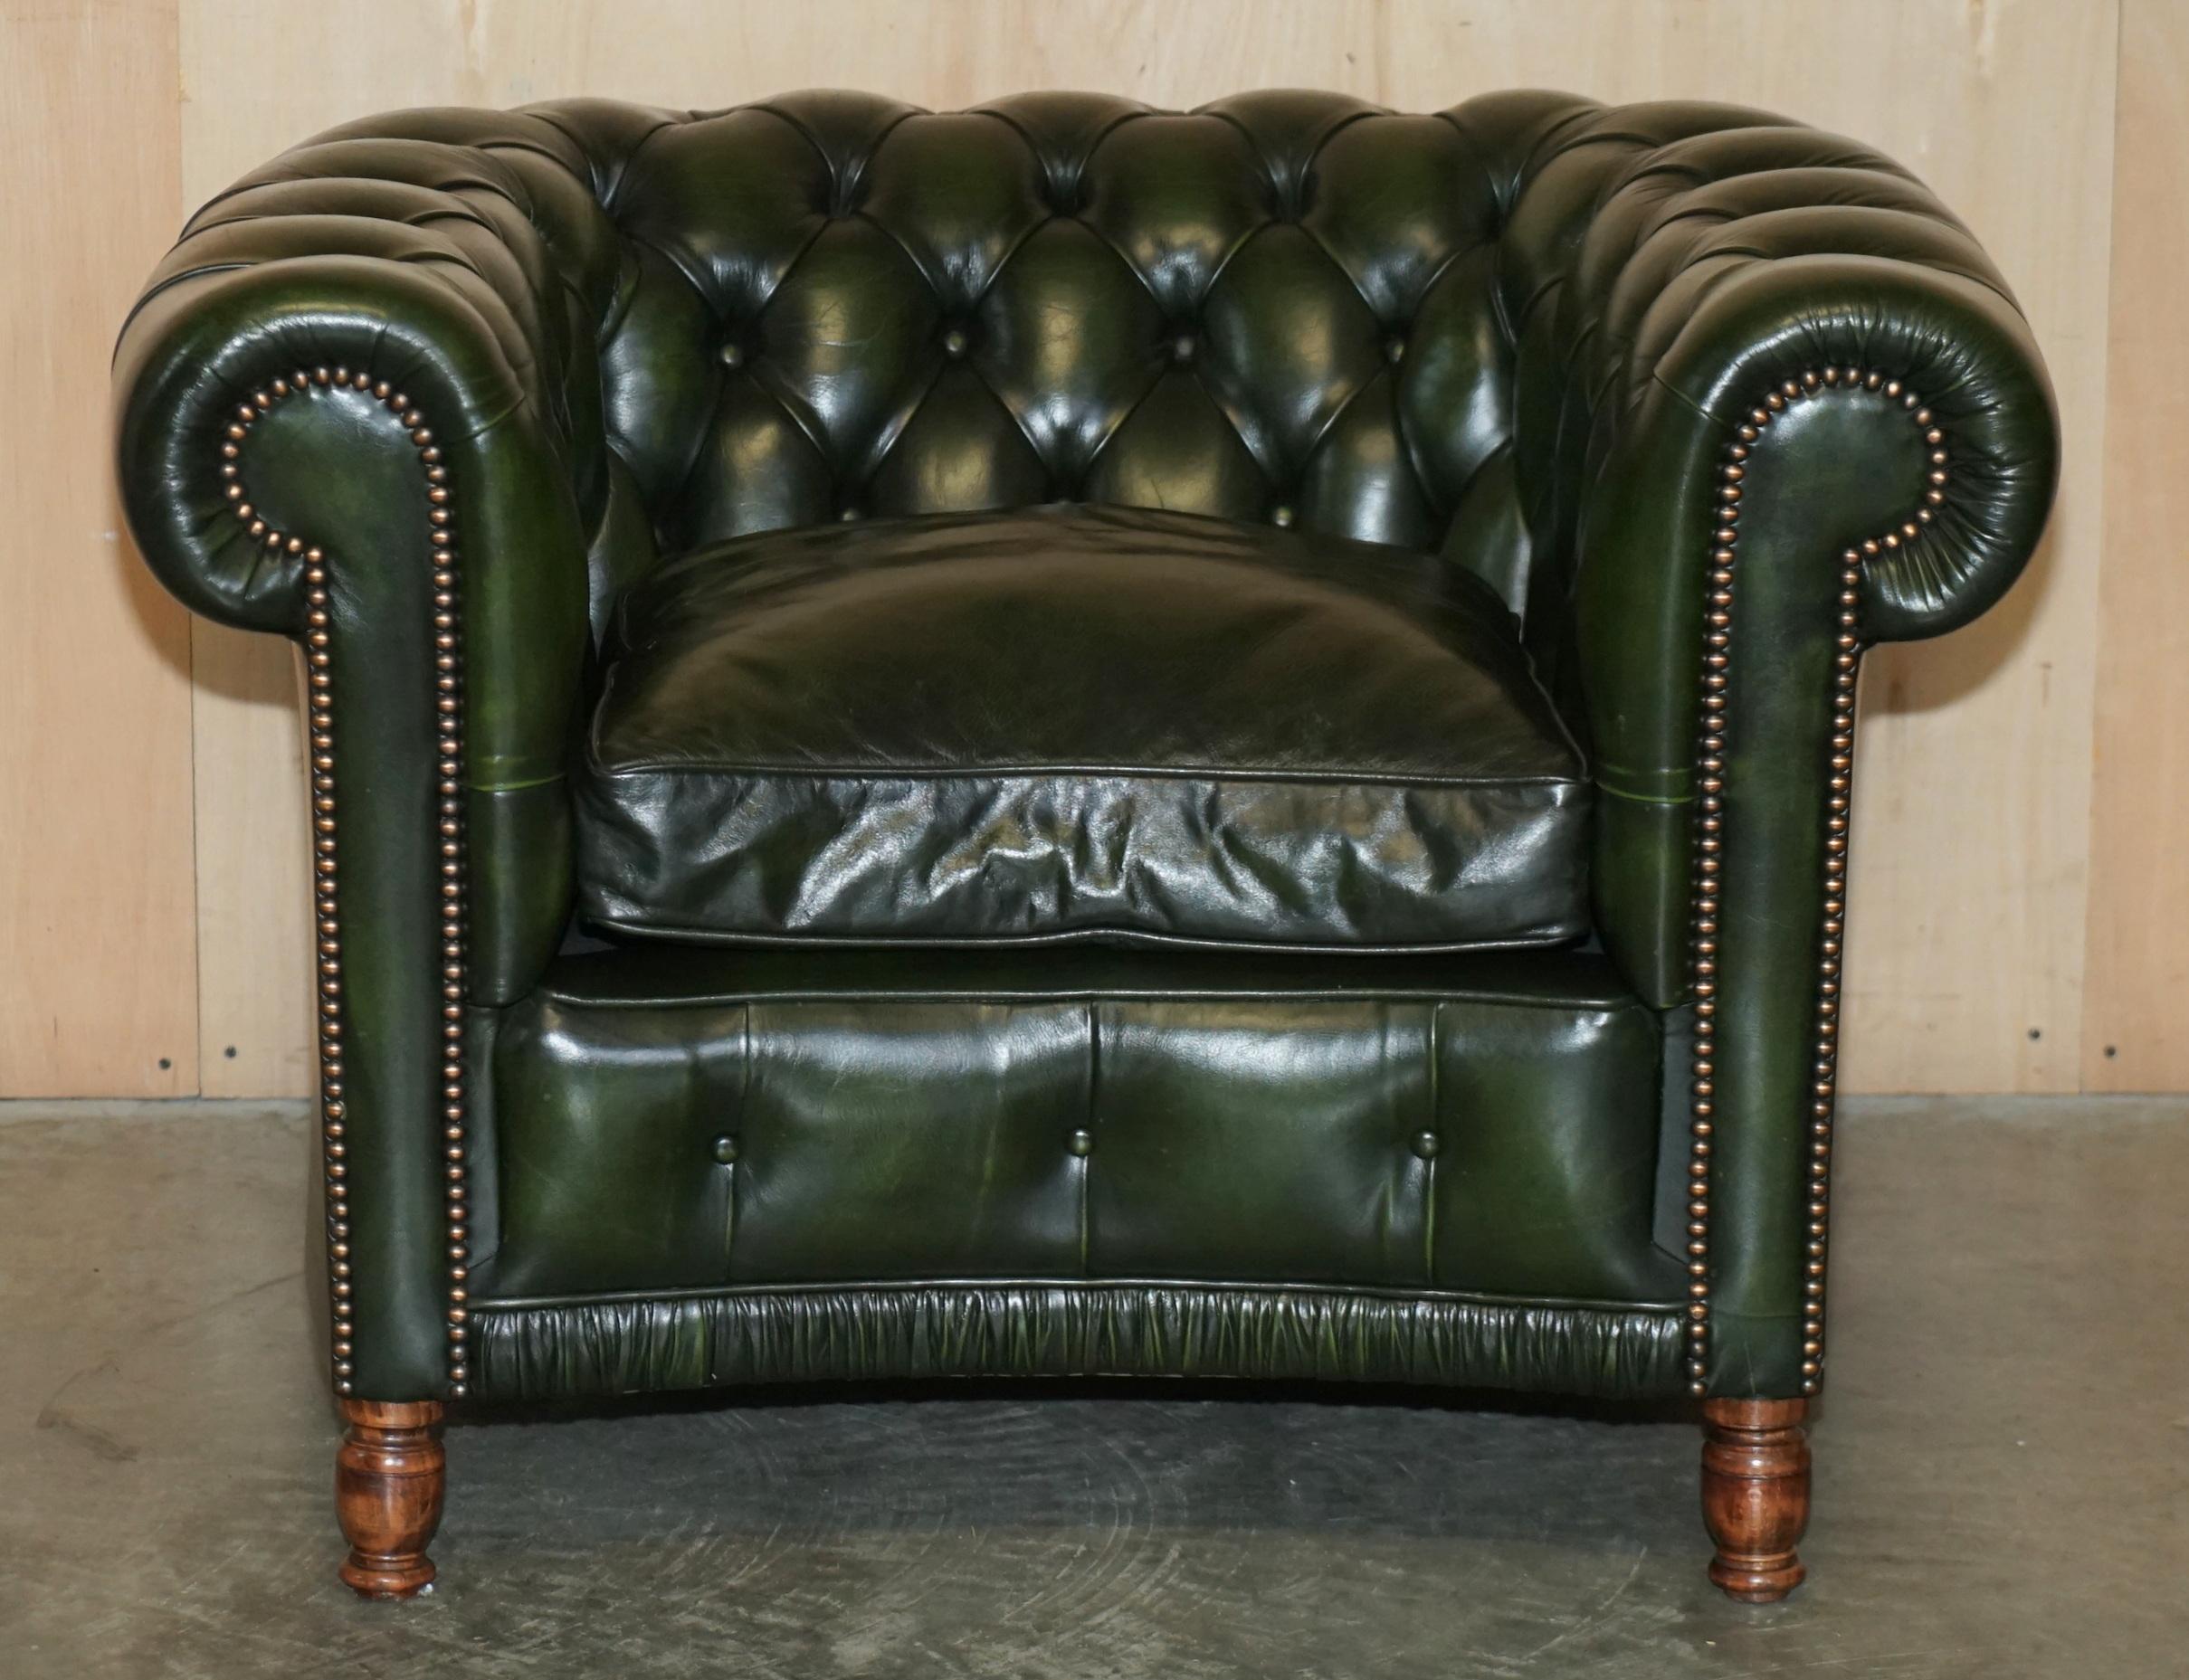 Royal House Antiques

Royal House Antiques is delighted to offer for sale this very nice curved fronted Chesterfield club armchair on Beech turned legs with green upholstery which is part of a suite

Please note the delivery fee listed is just a